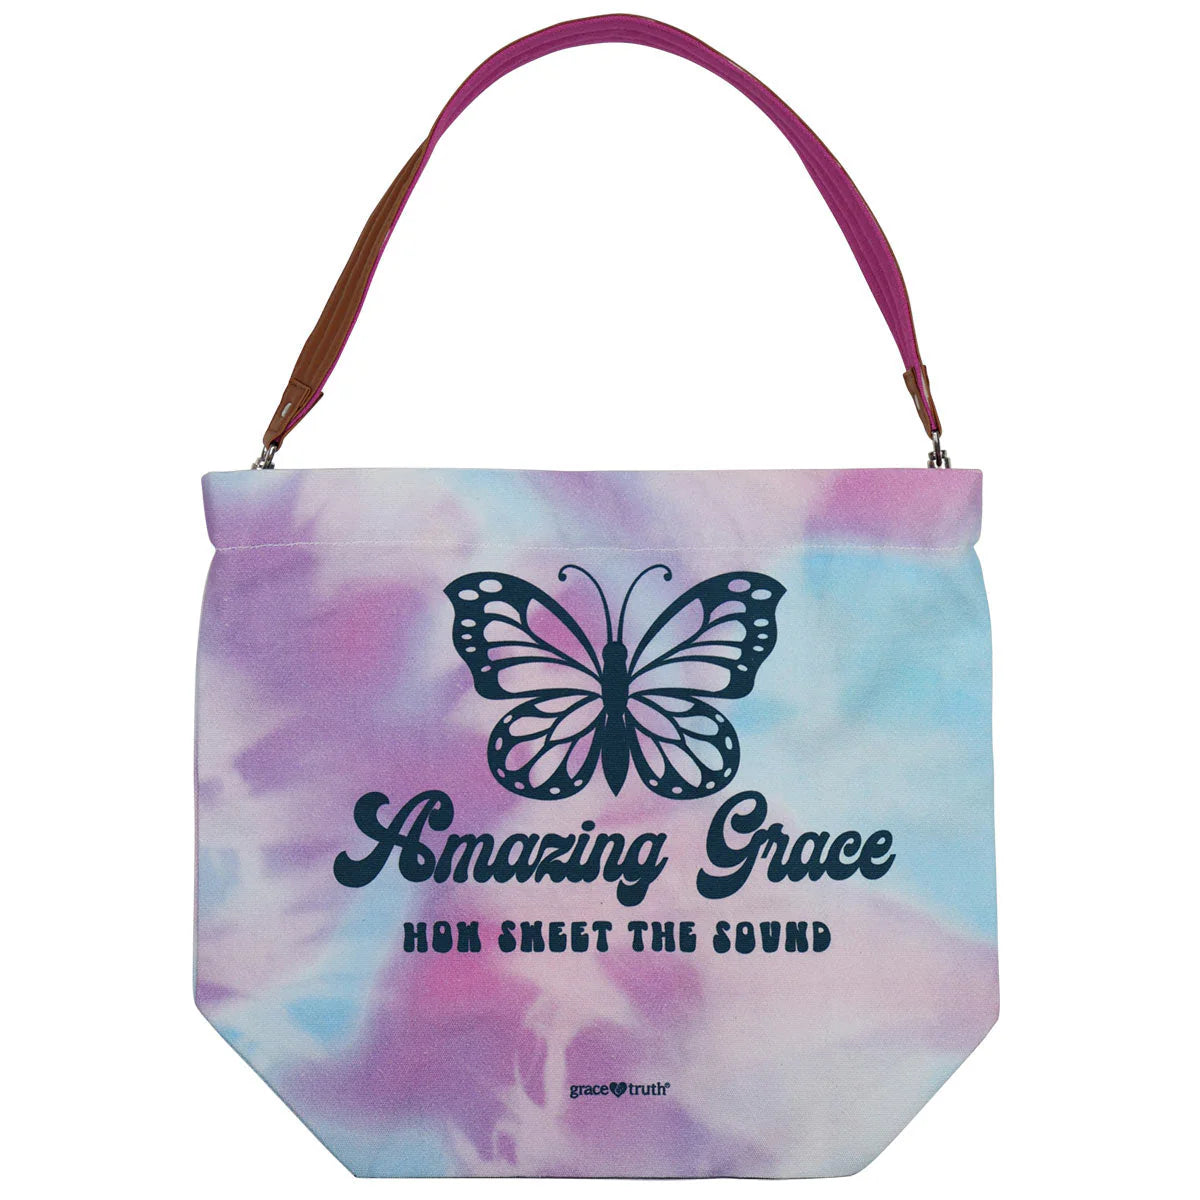 grace & truth Womens Tote Bag Amazing Grace Butterfly grace & truth® accessories Bags Women's